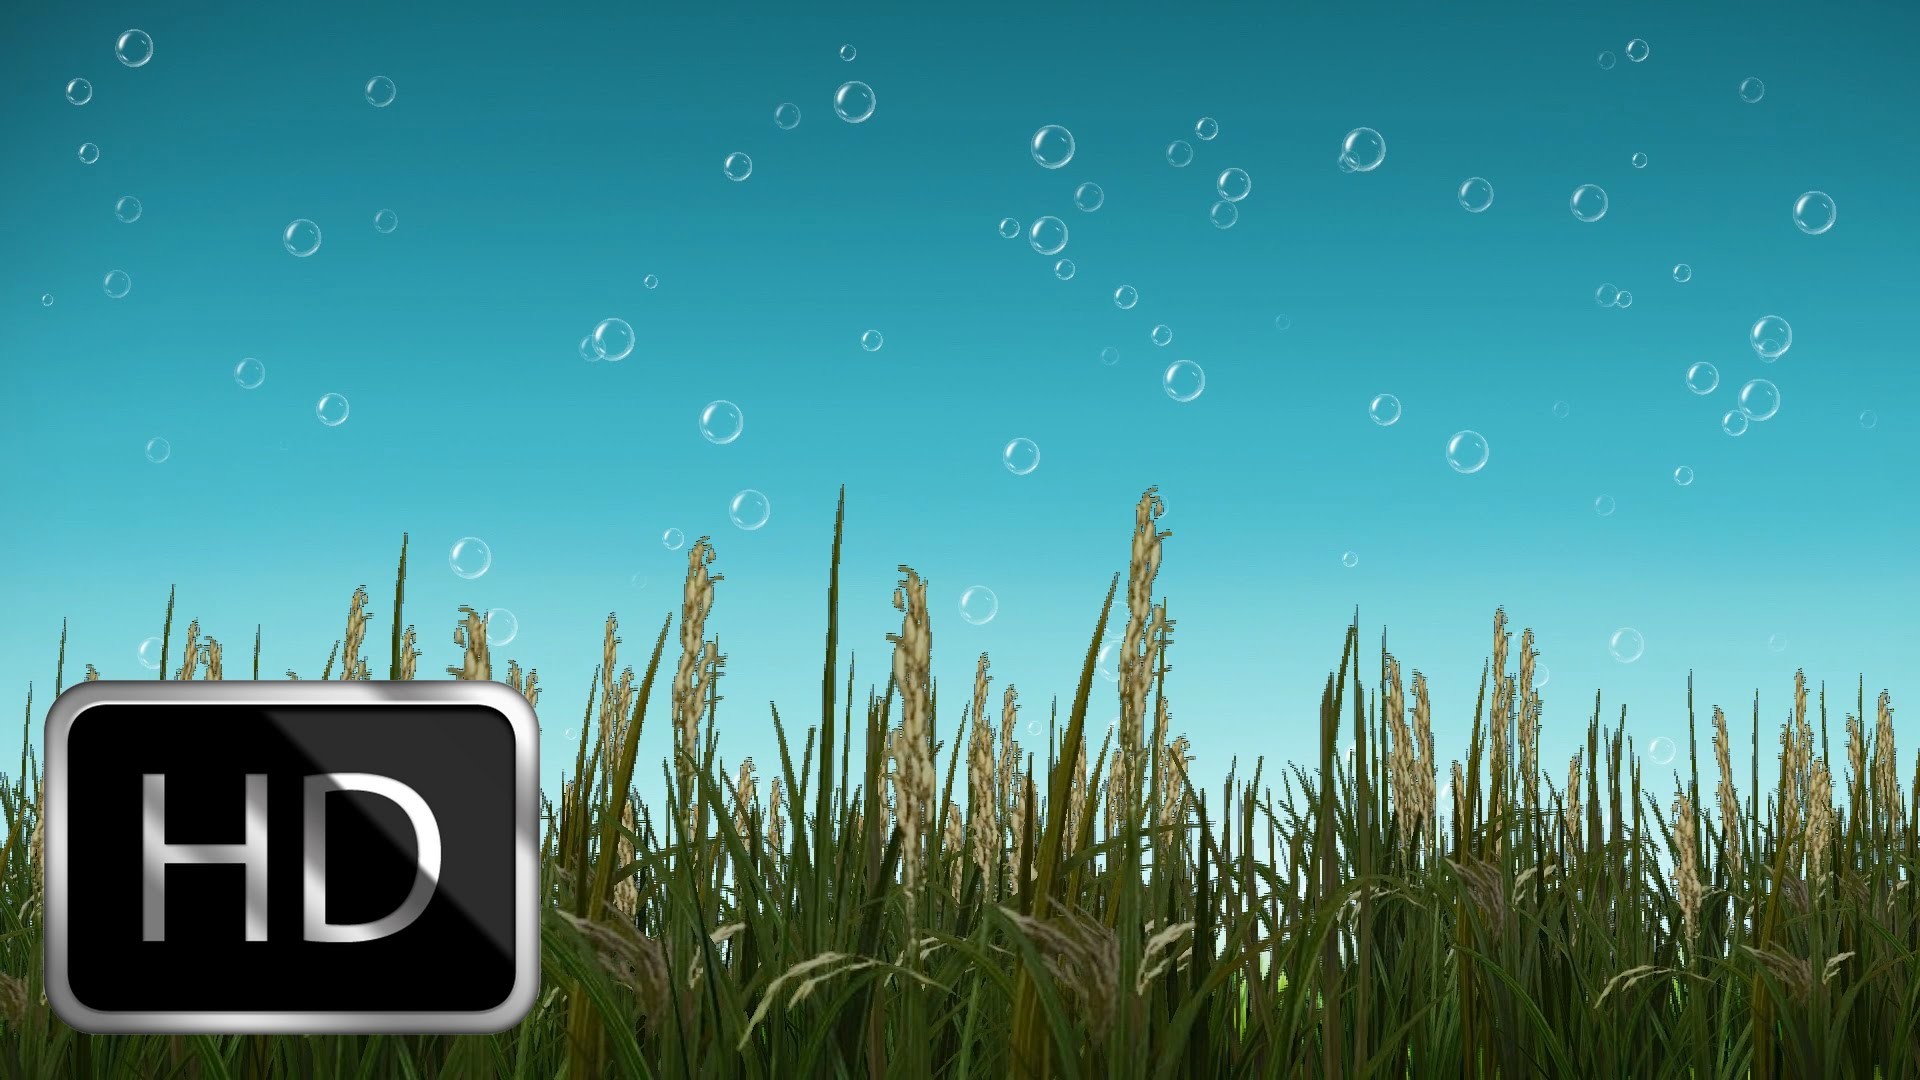 Free Nature Motion Background With Beautiful Bubbles - Nature Background  Pictures Animated - 1920x1080 Wallpaper 